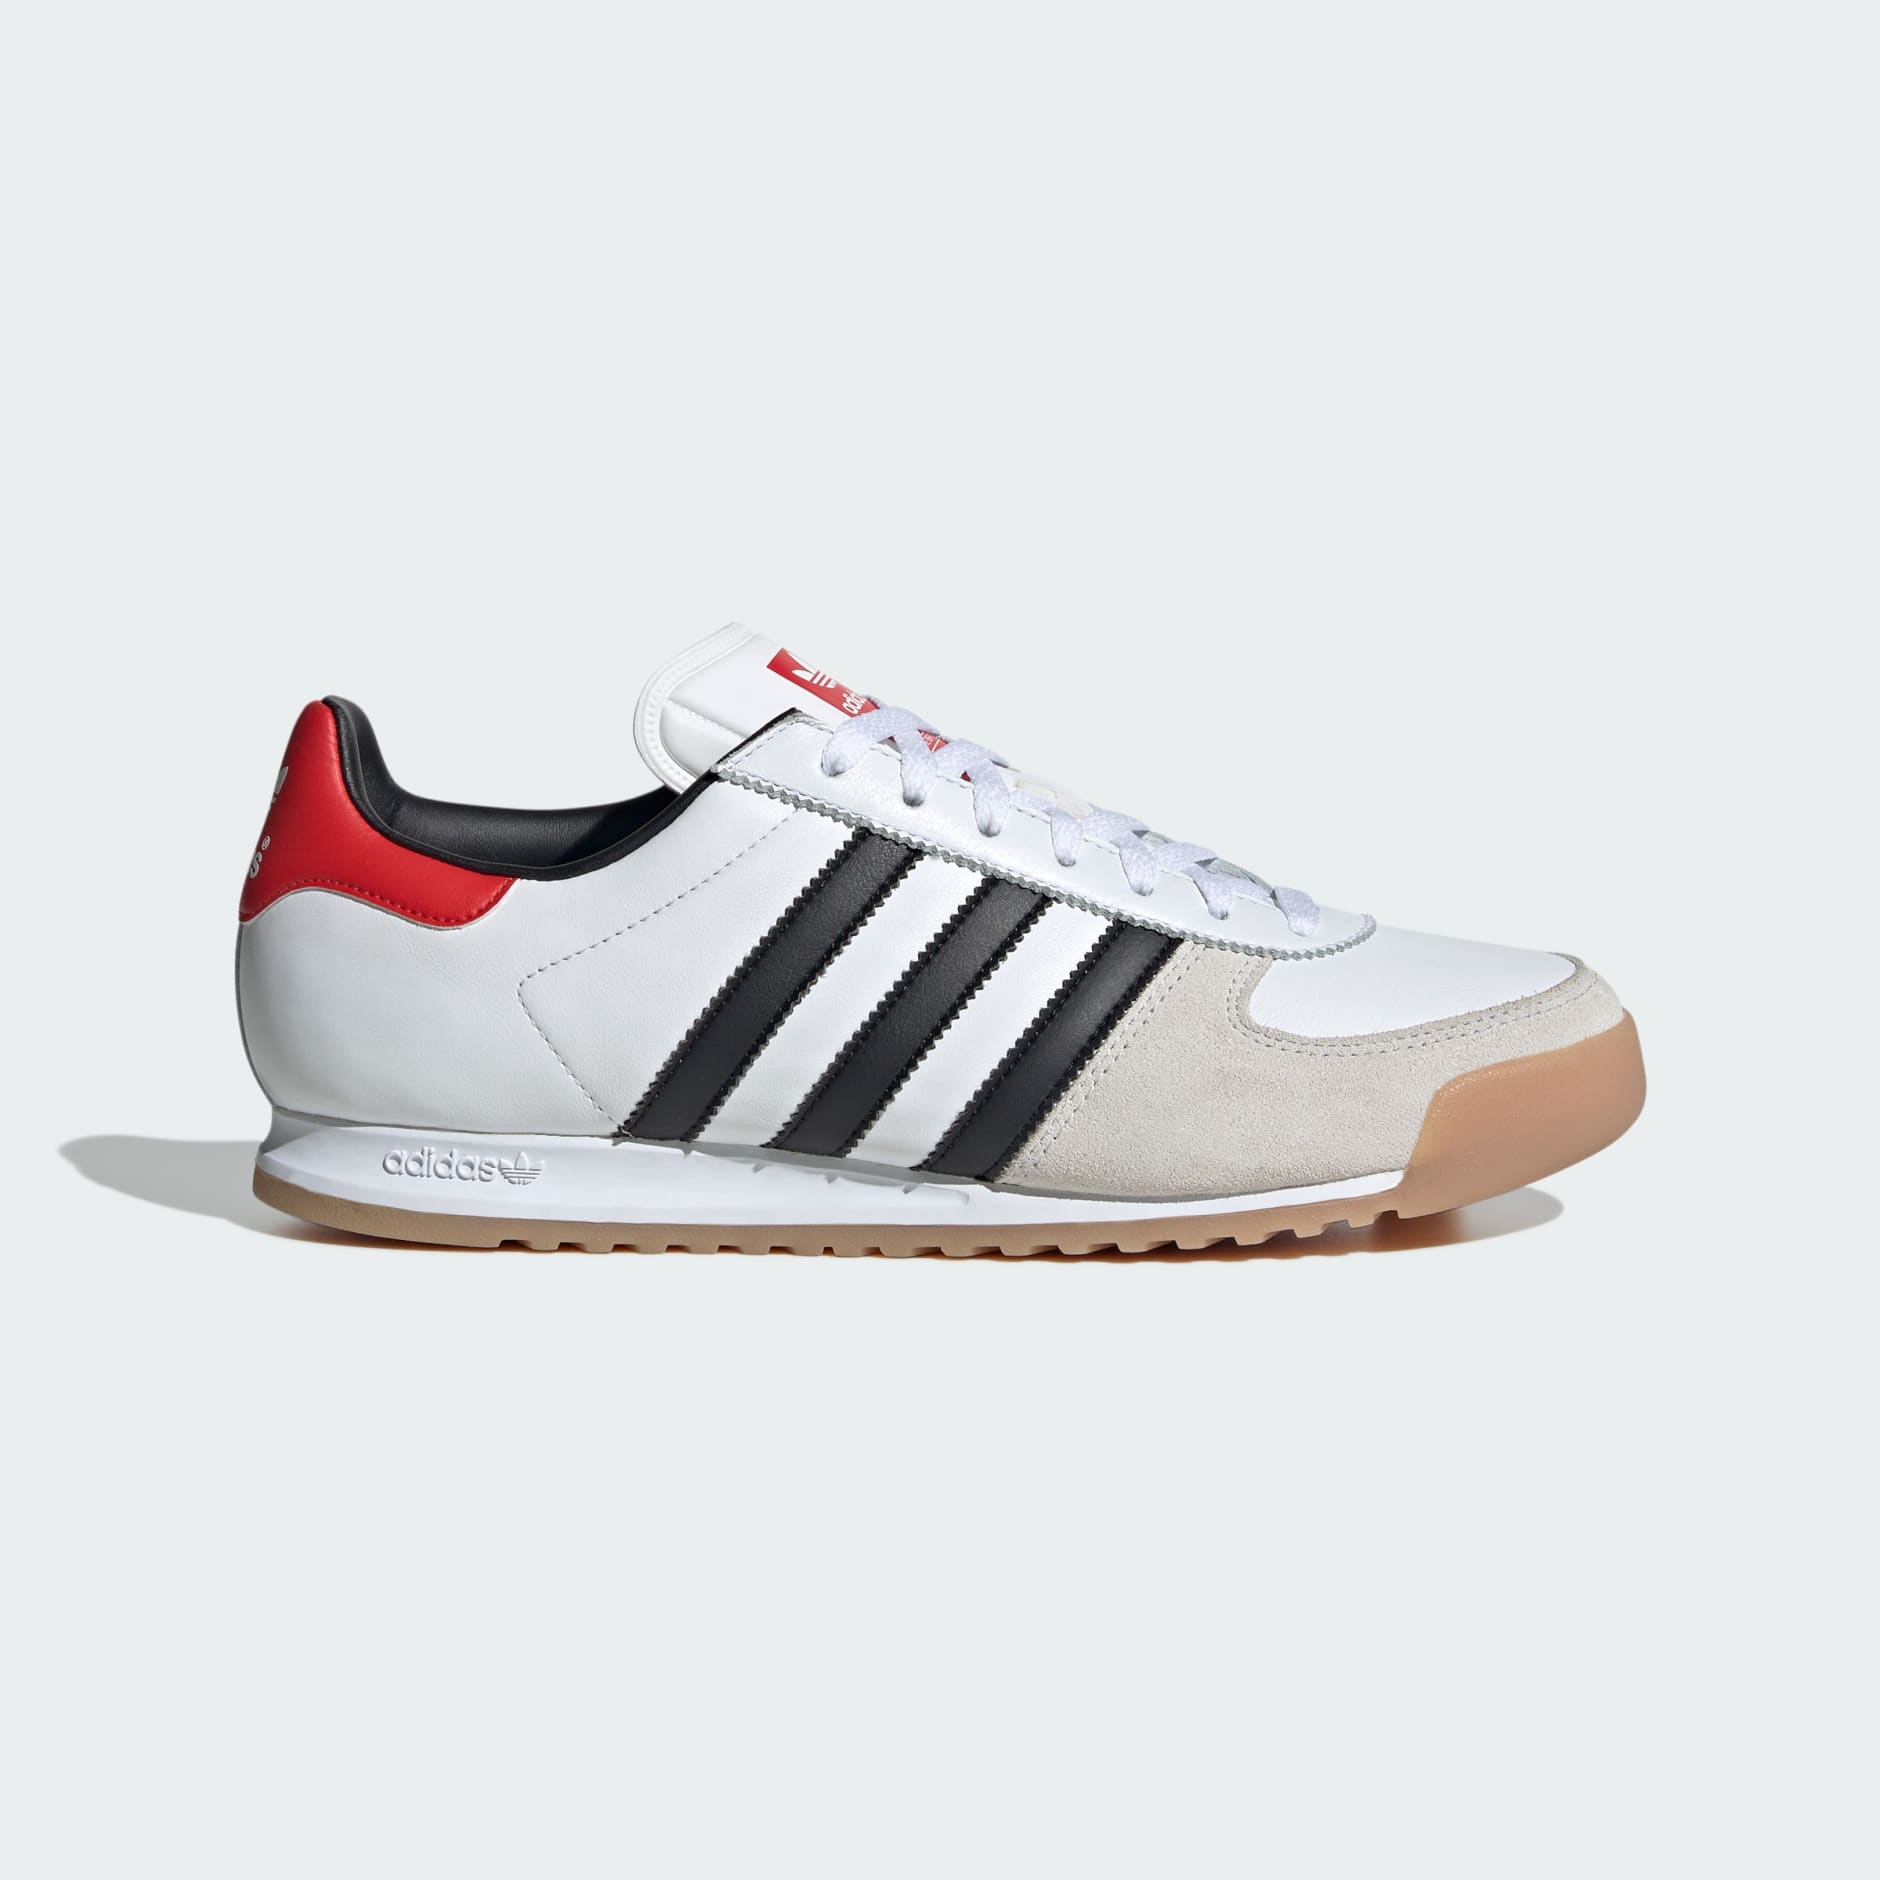 Shoes - Allteam Shoes - White | adidas South Africa